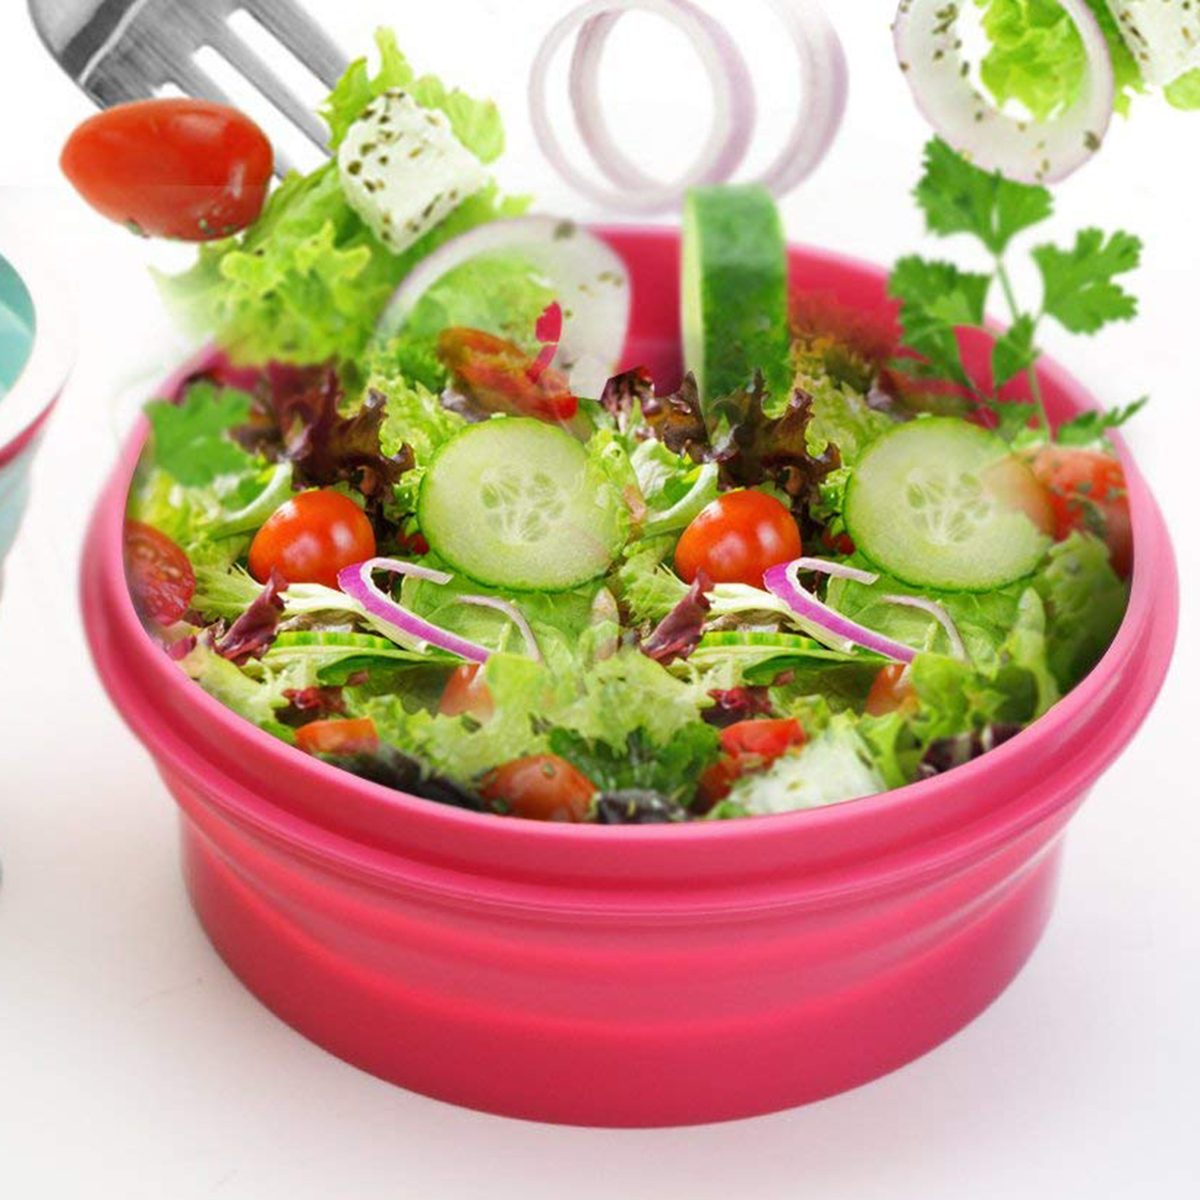 Our Favorite Salad Containers